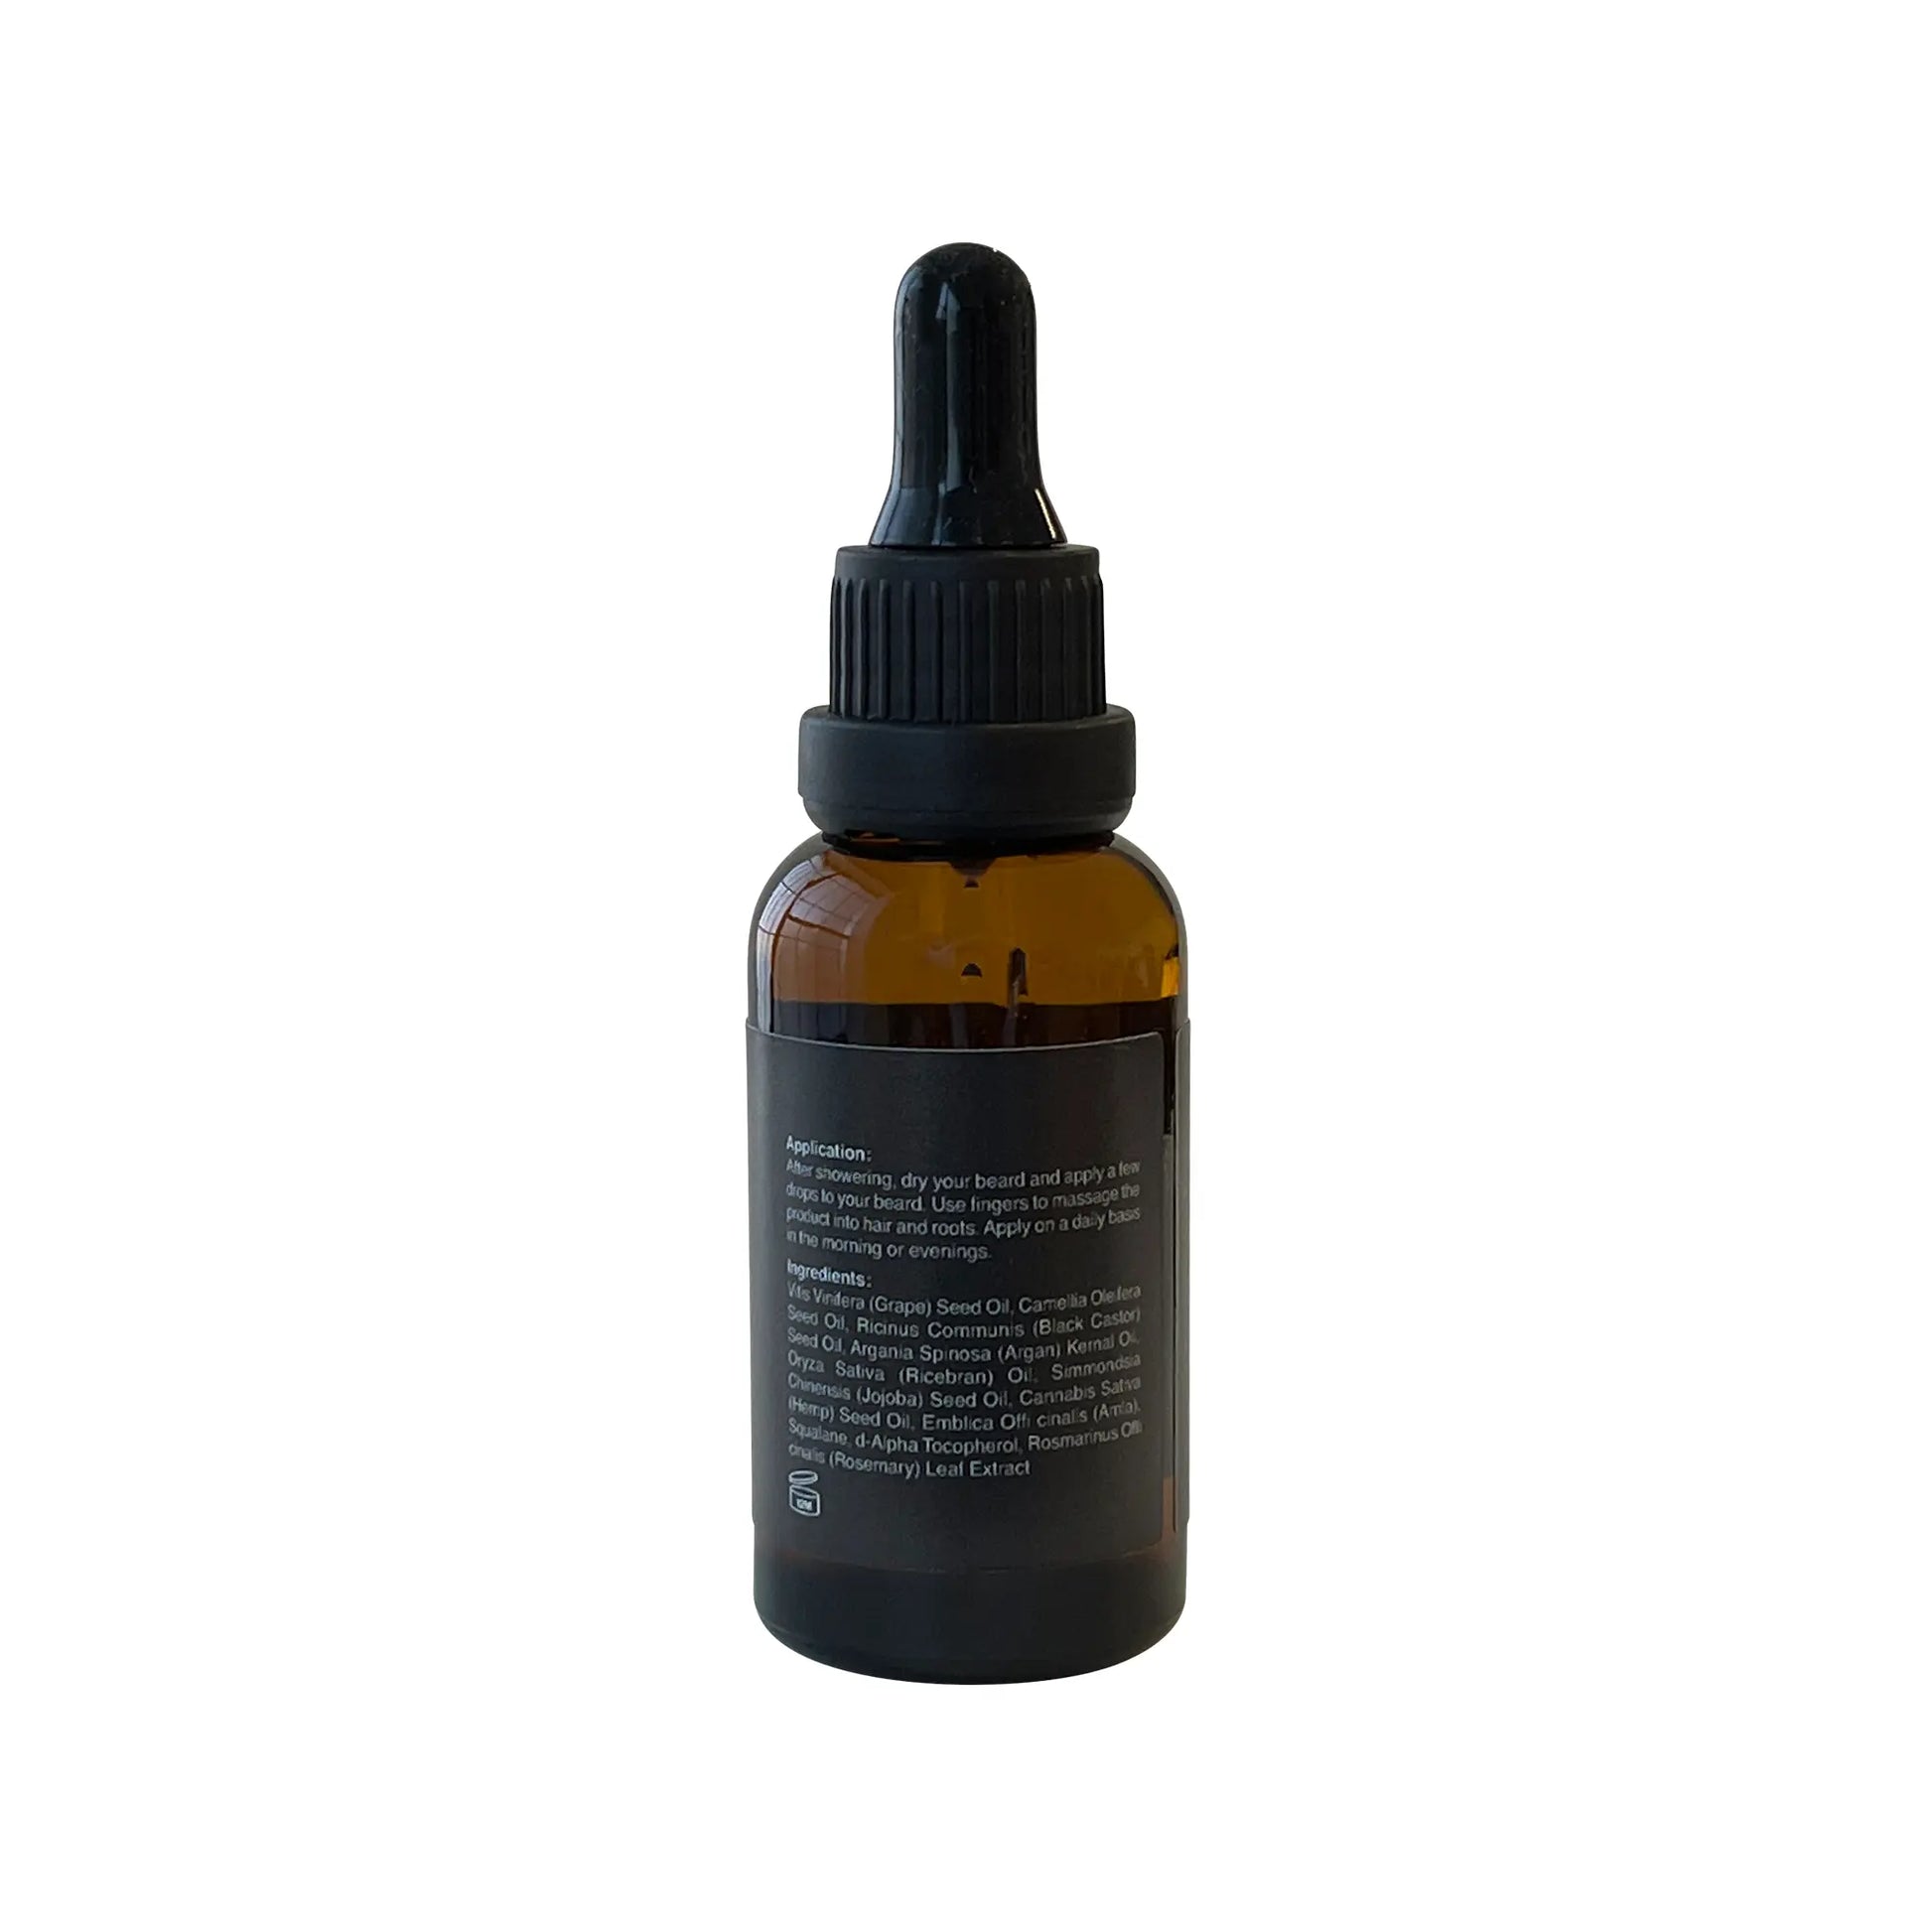 A bottle of Beard Growth Oil on a white background